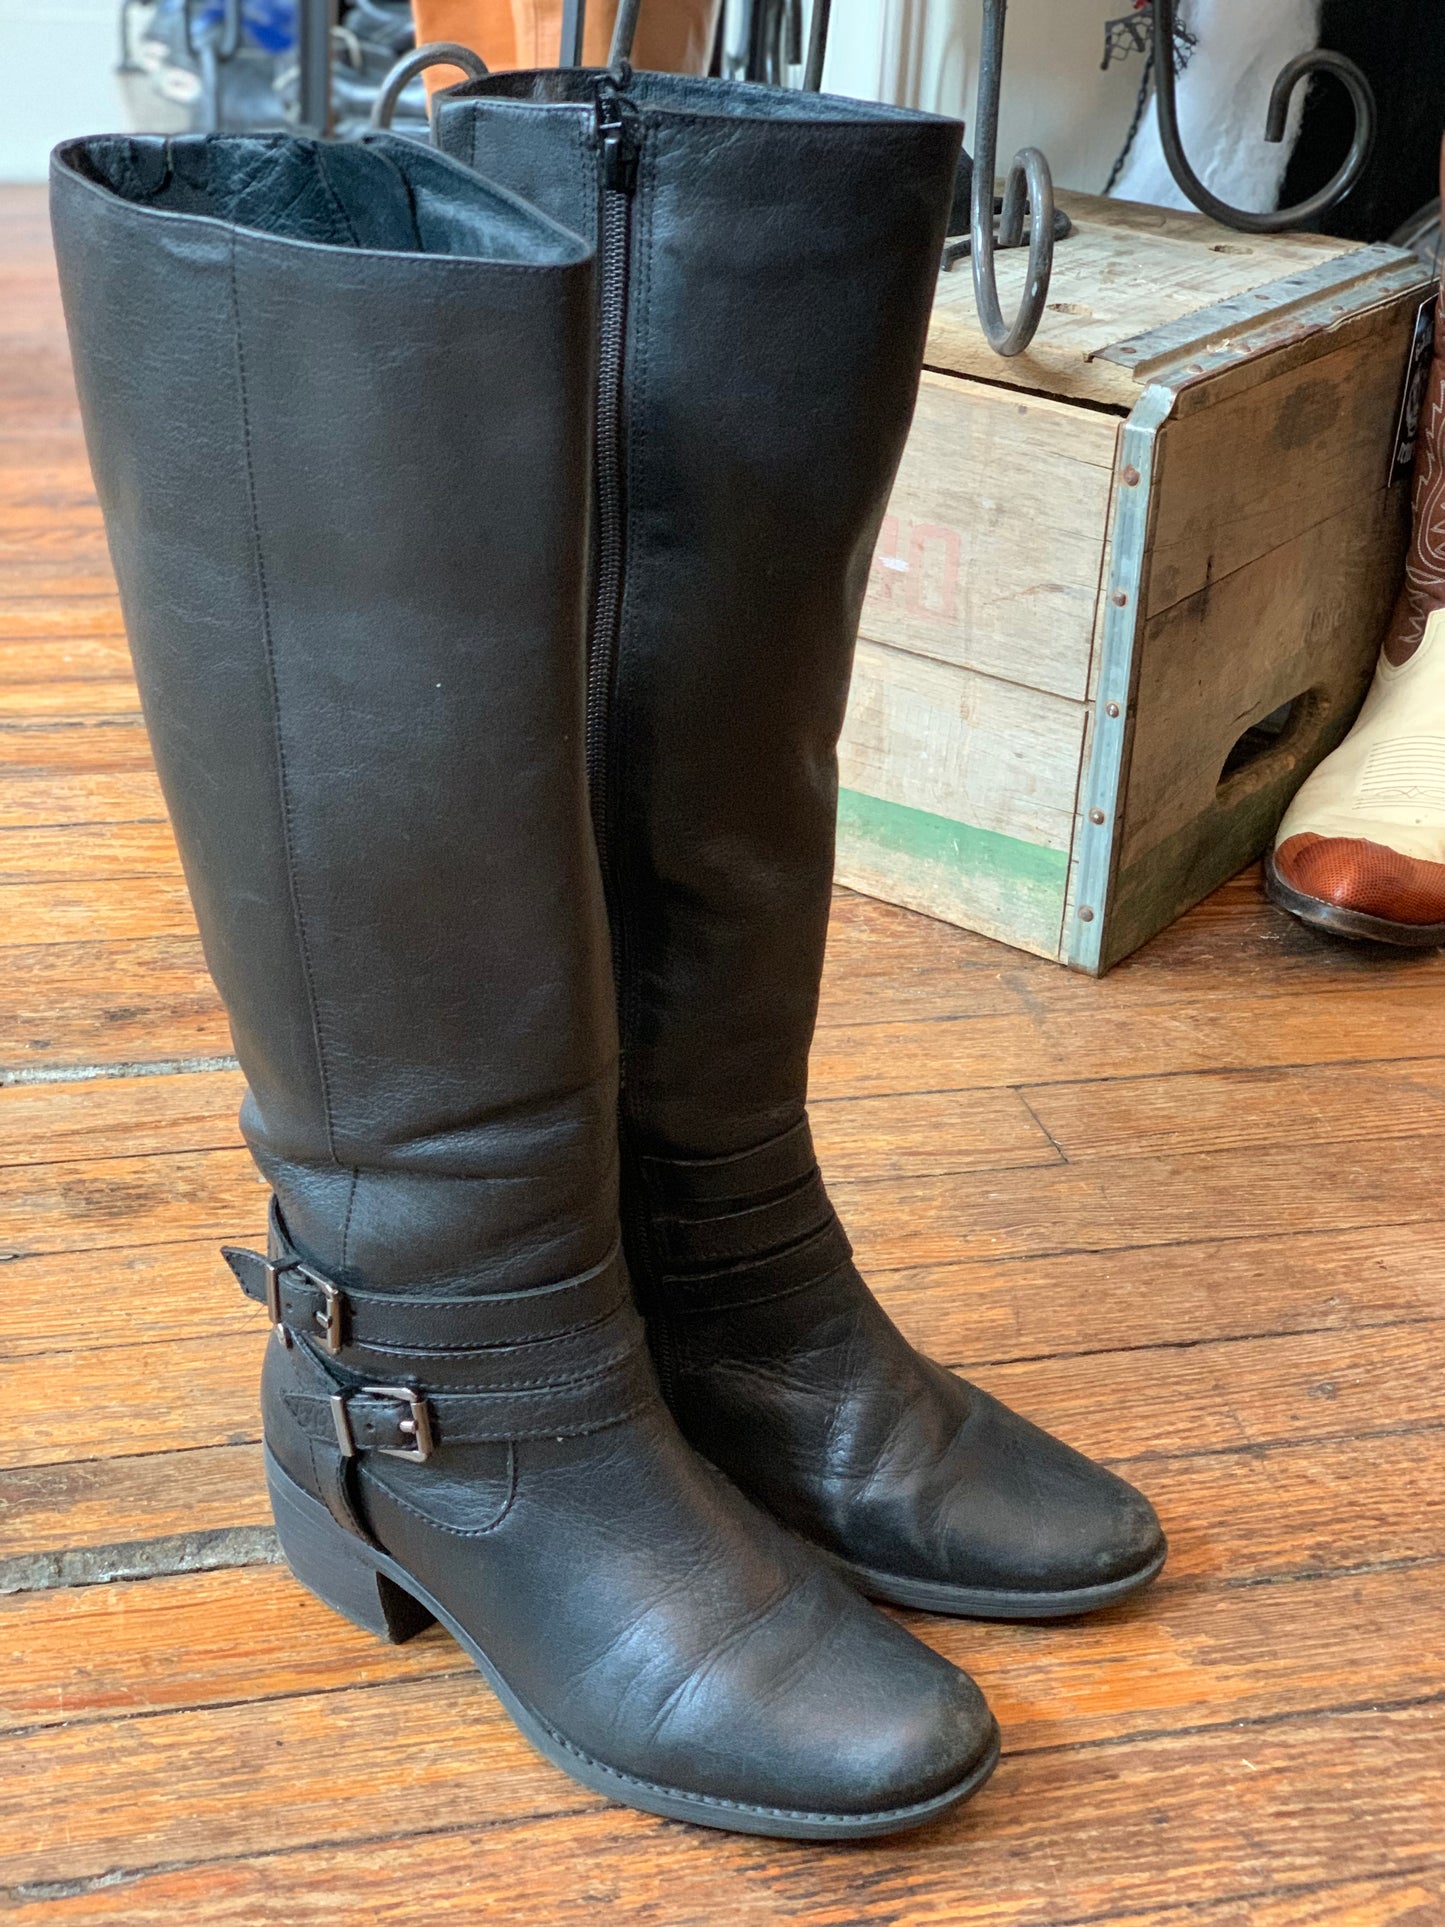 Tall Black Leather Riding Boots